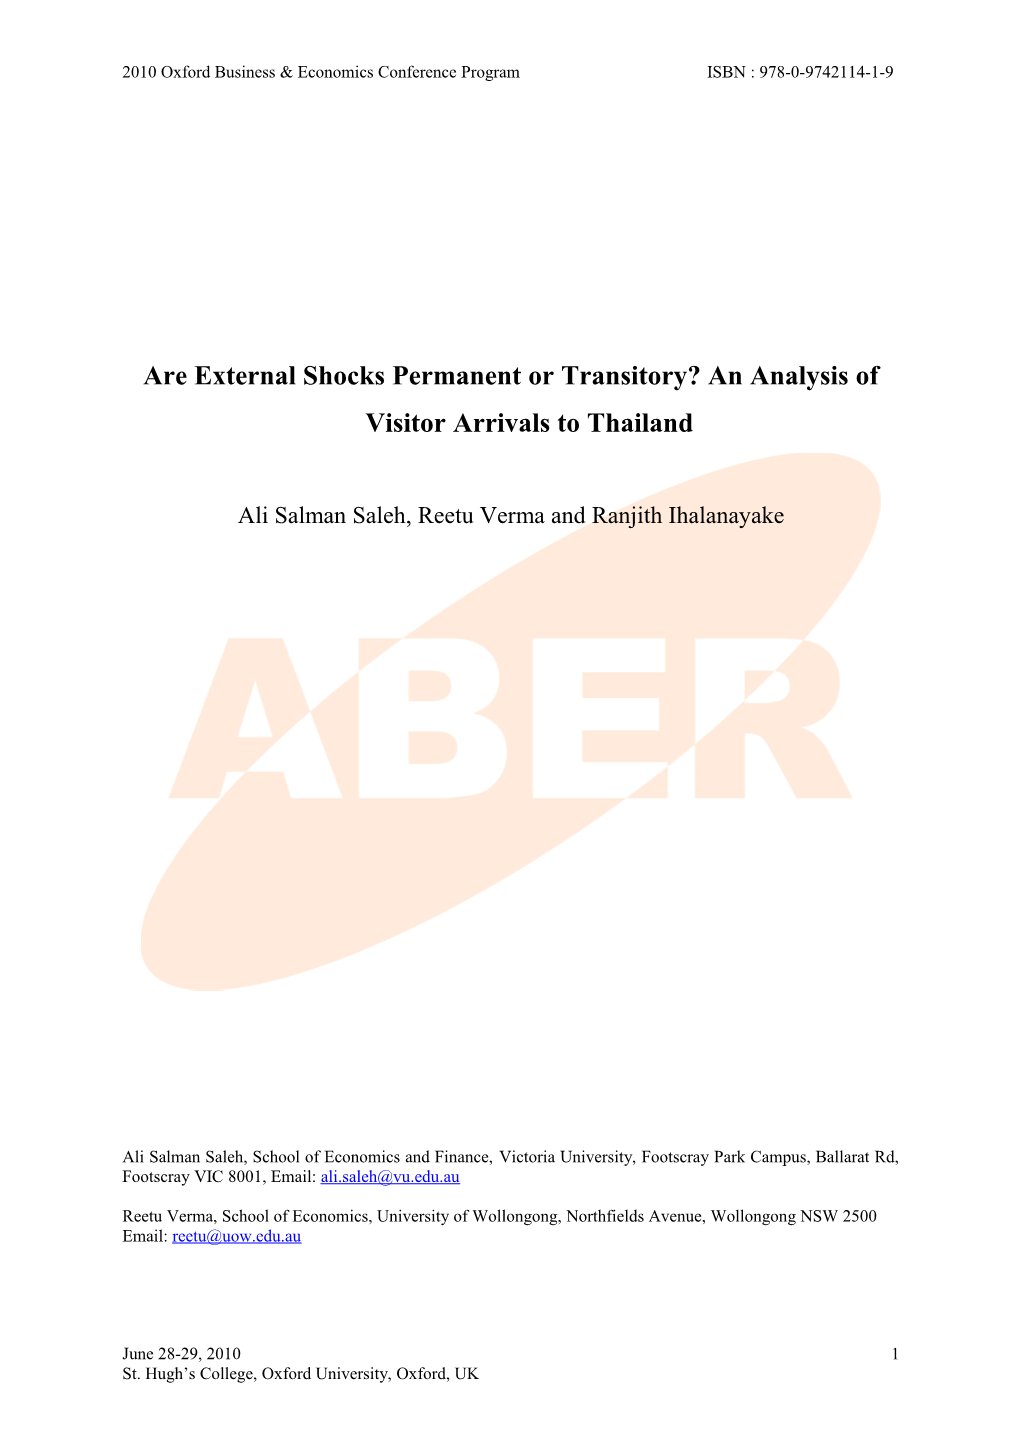 Are External Shocks Permanent Or Transitory? an Analysis of Visitor Arrivals to Thailand